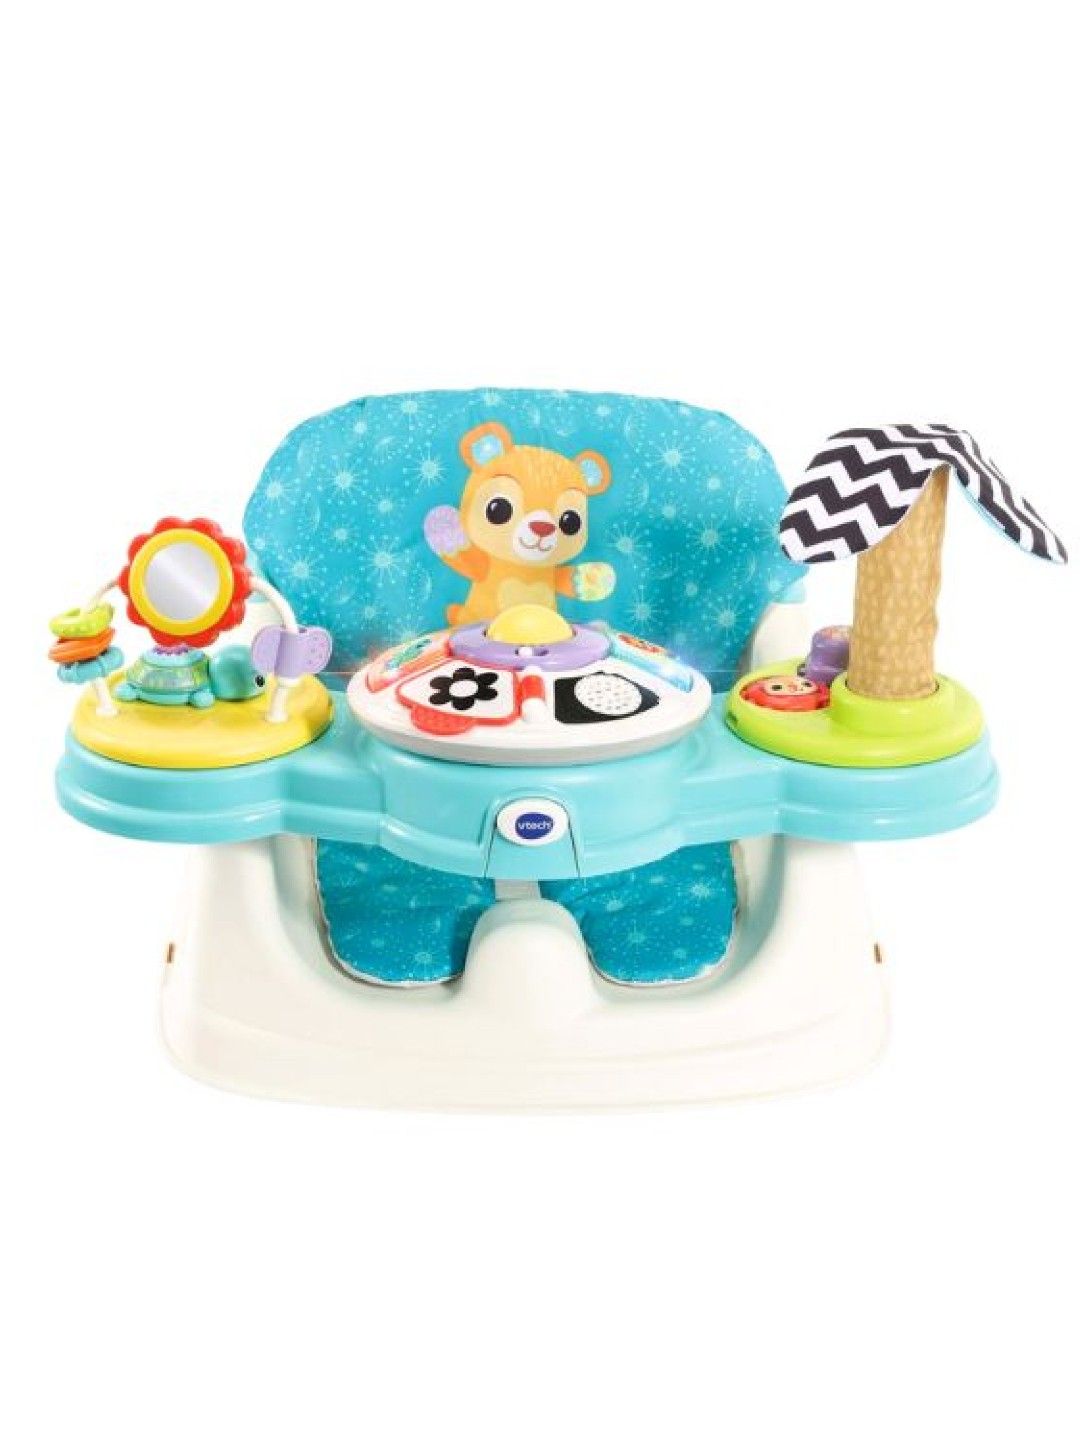 VTech 5 in 1 Baby Booster Seat (Multicolor- Image 1)